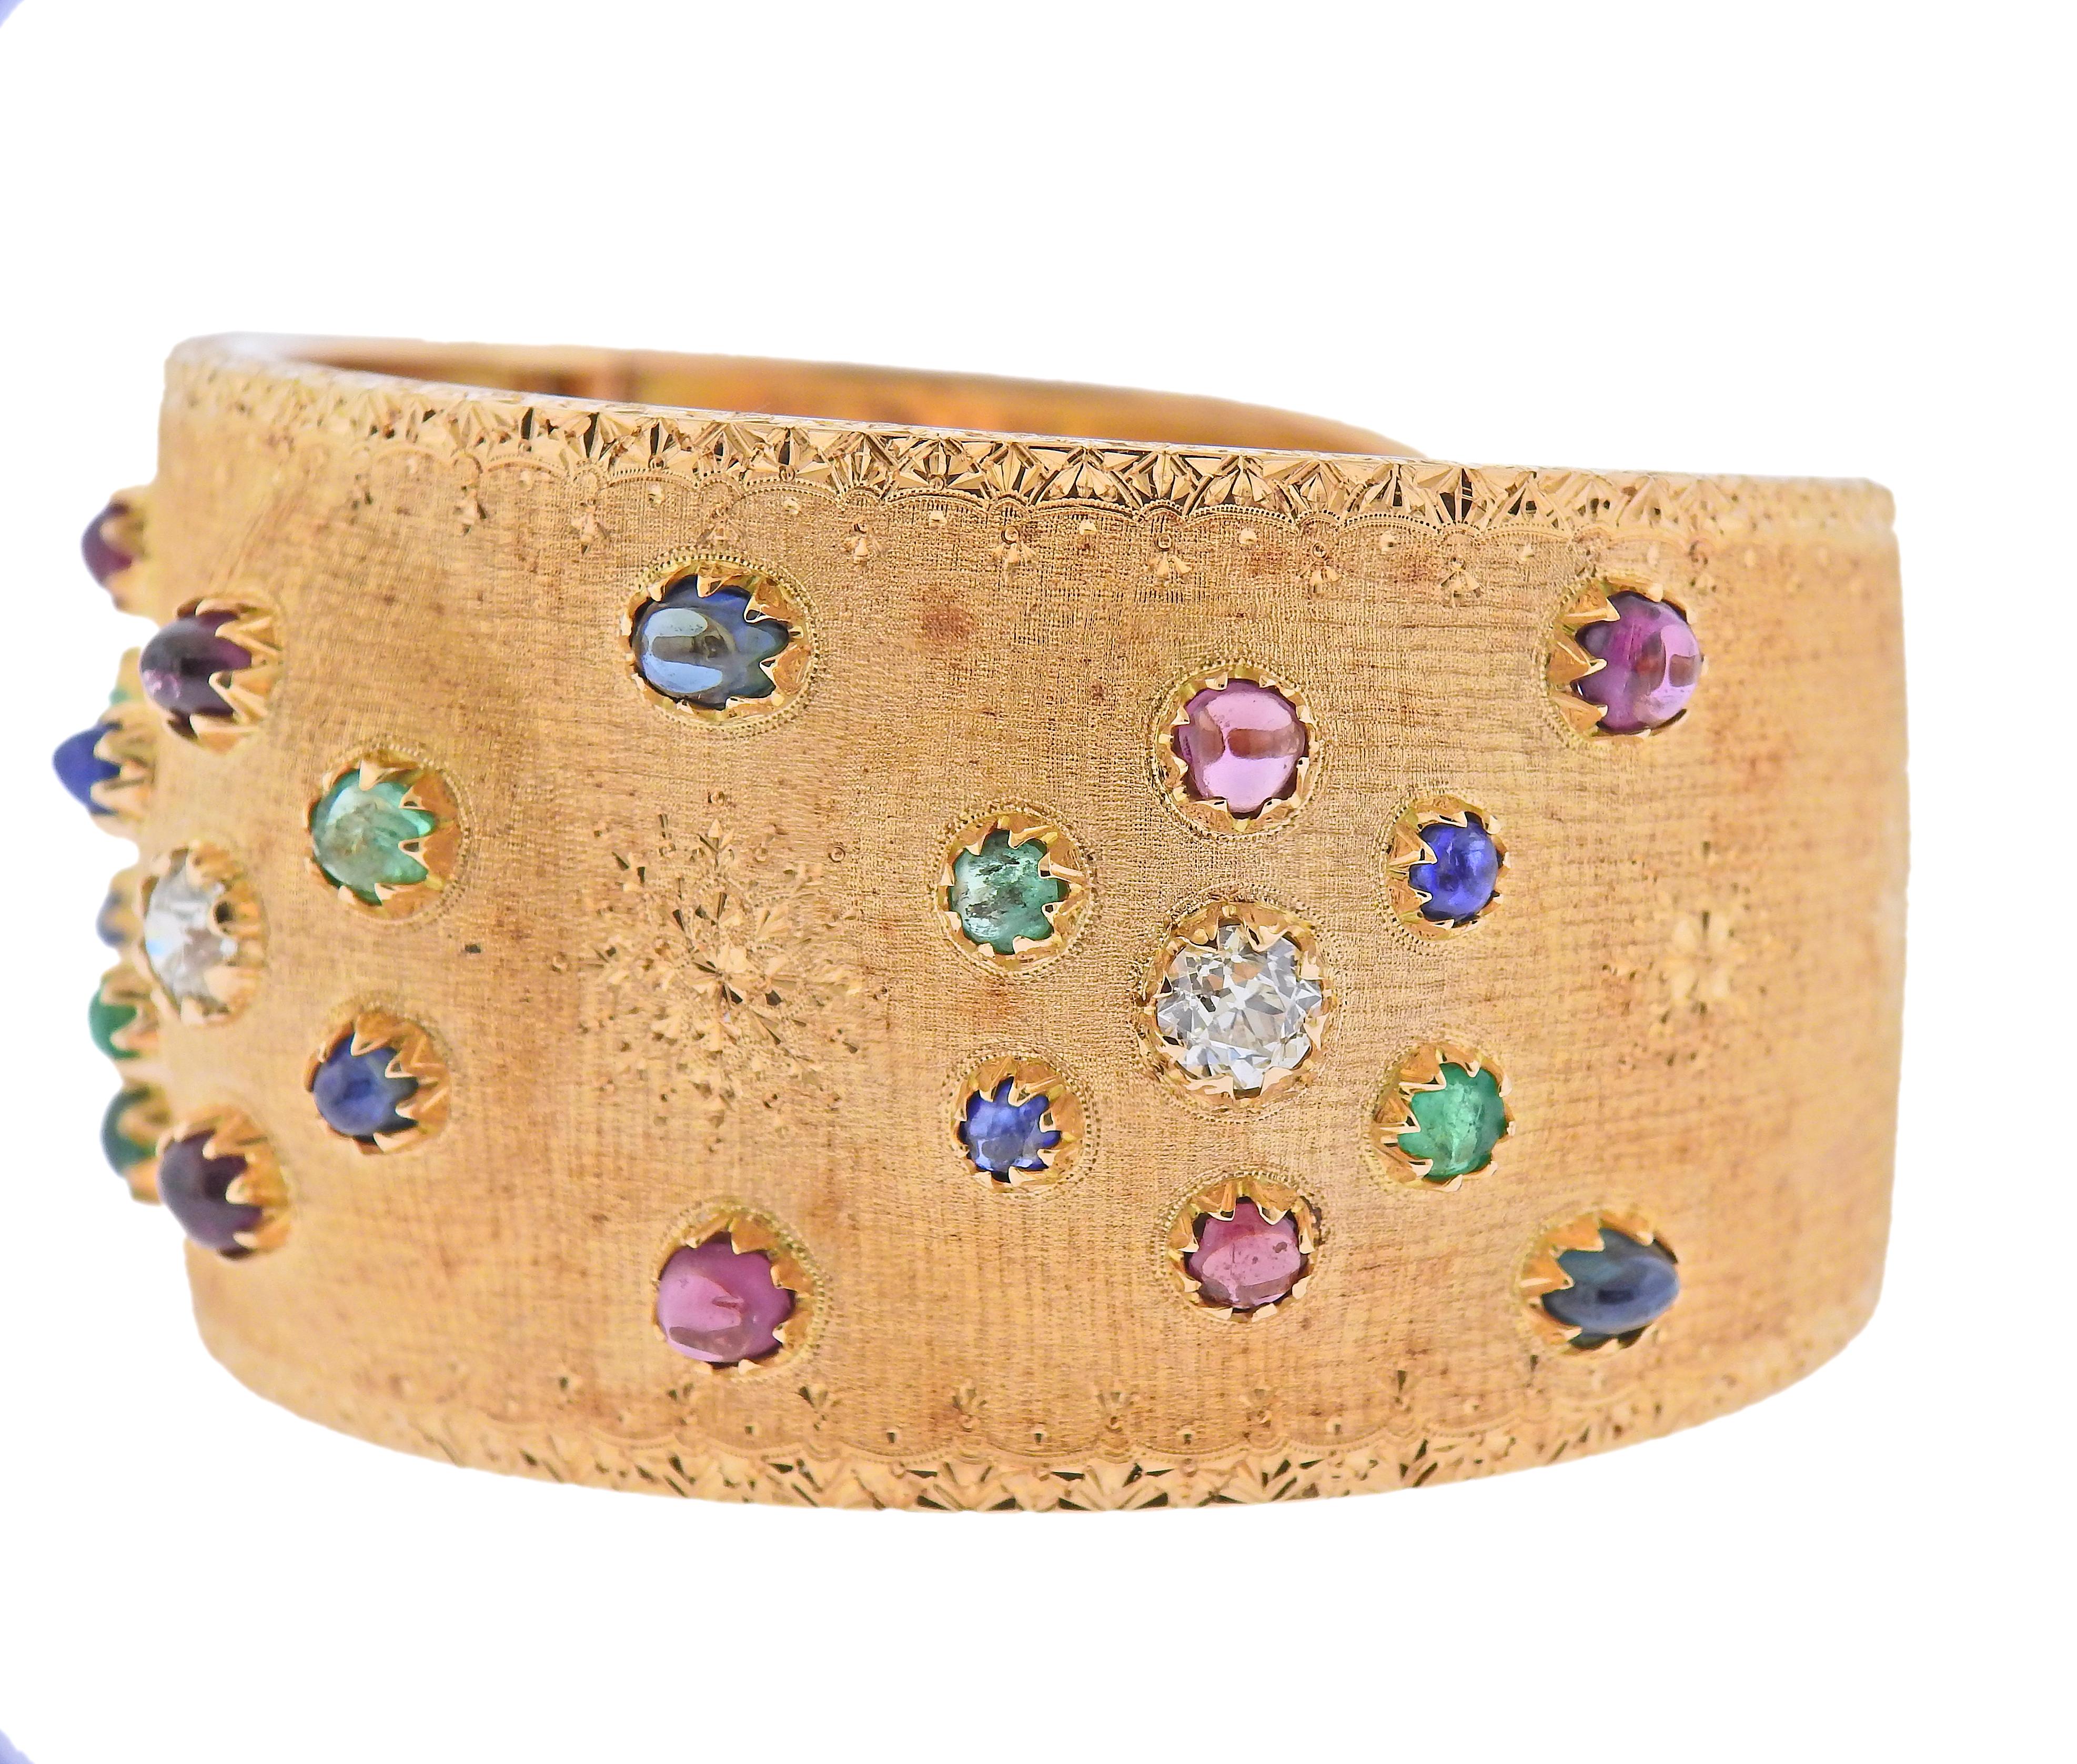 Impressive 18k rose gold cuff bracelet by Buccellati, set with emerald, sapphire, ruby cabochons and approx. 1.70cts in diamonds. Bracelet will fit approx. 7.5